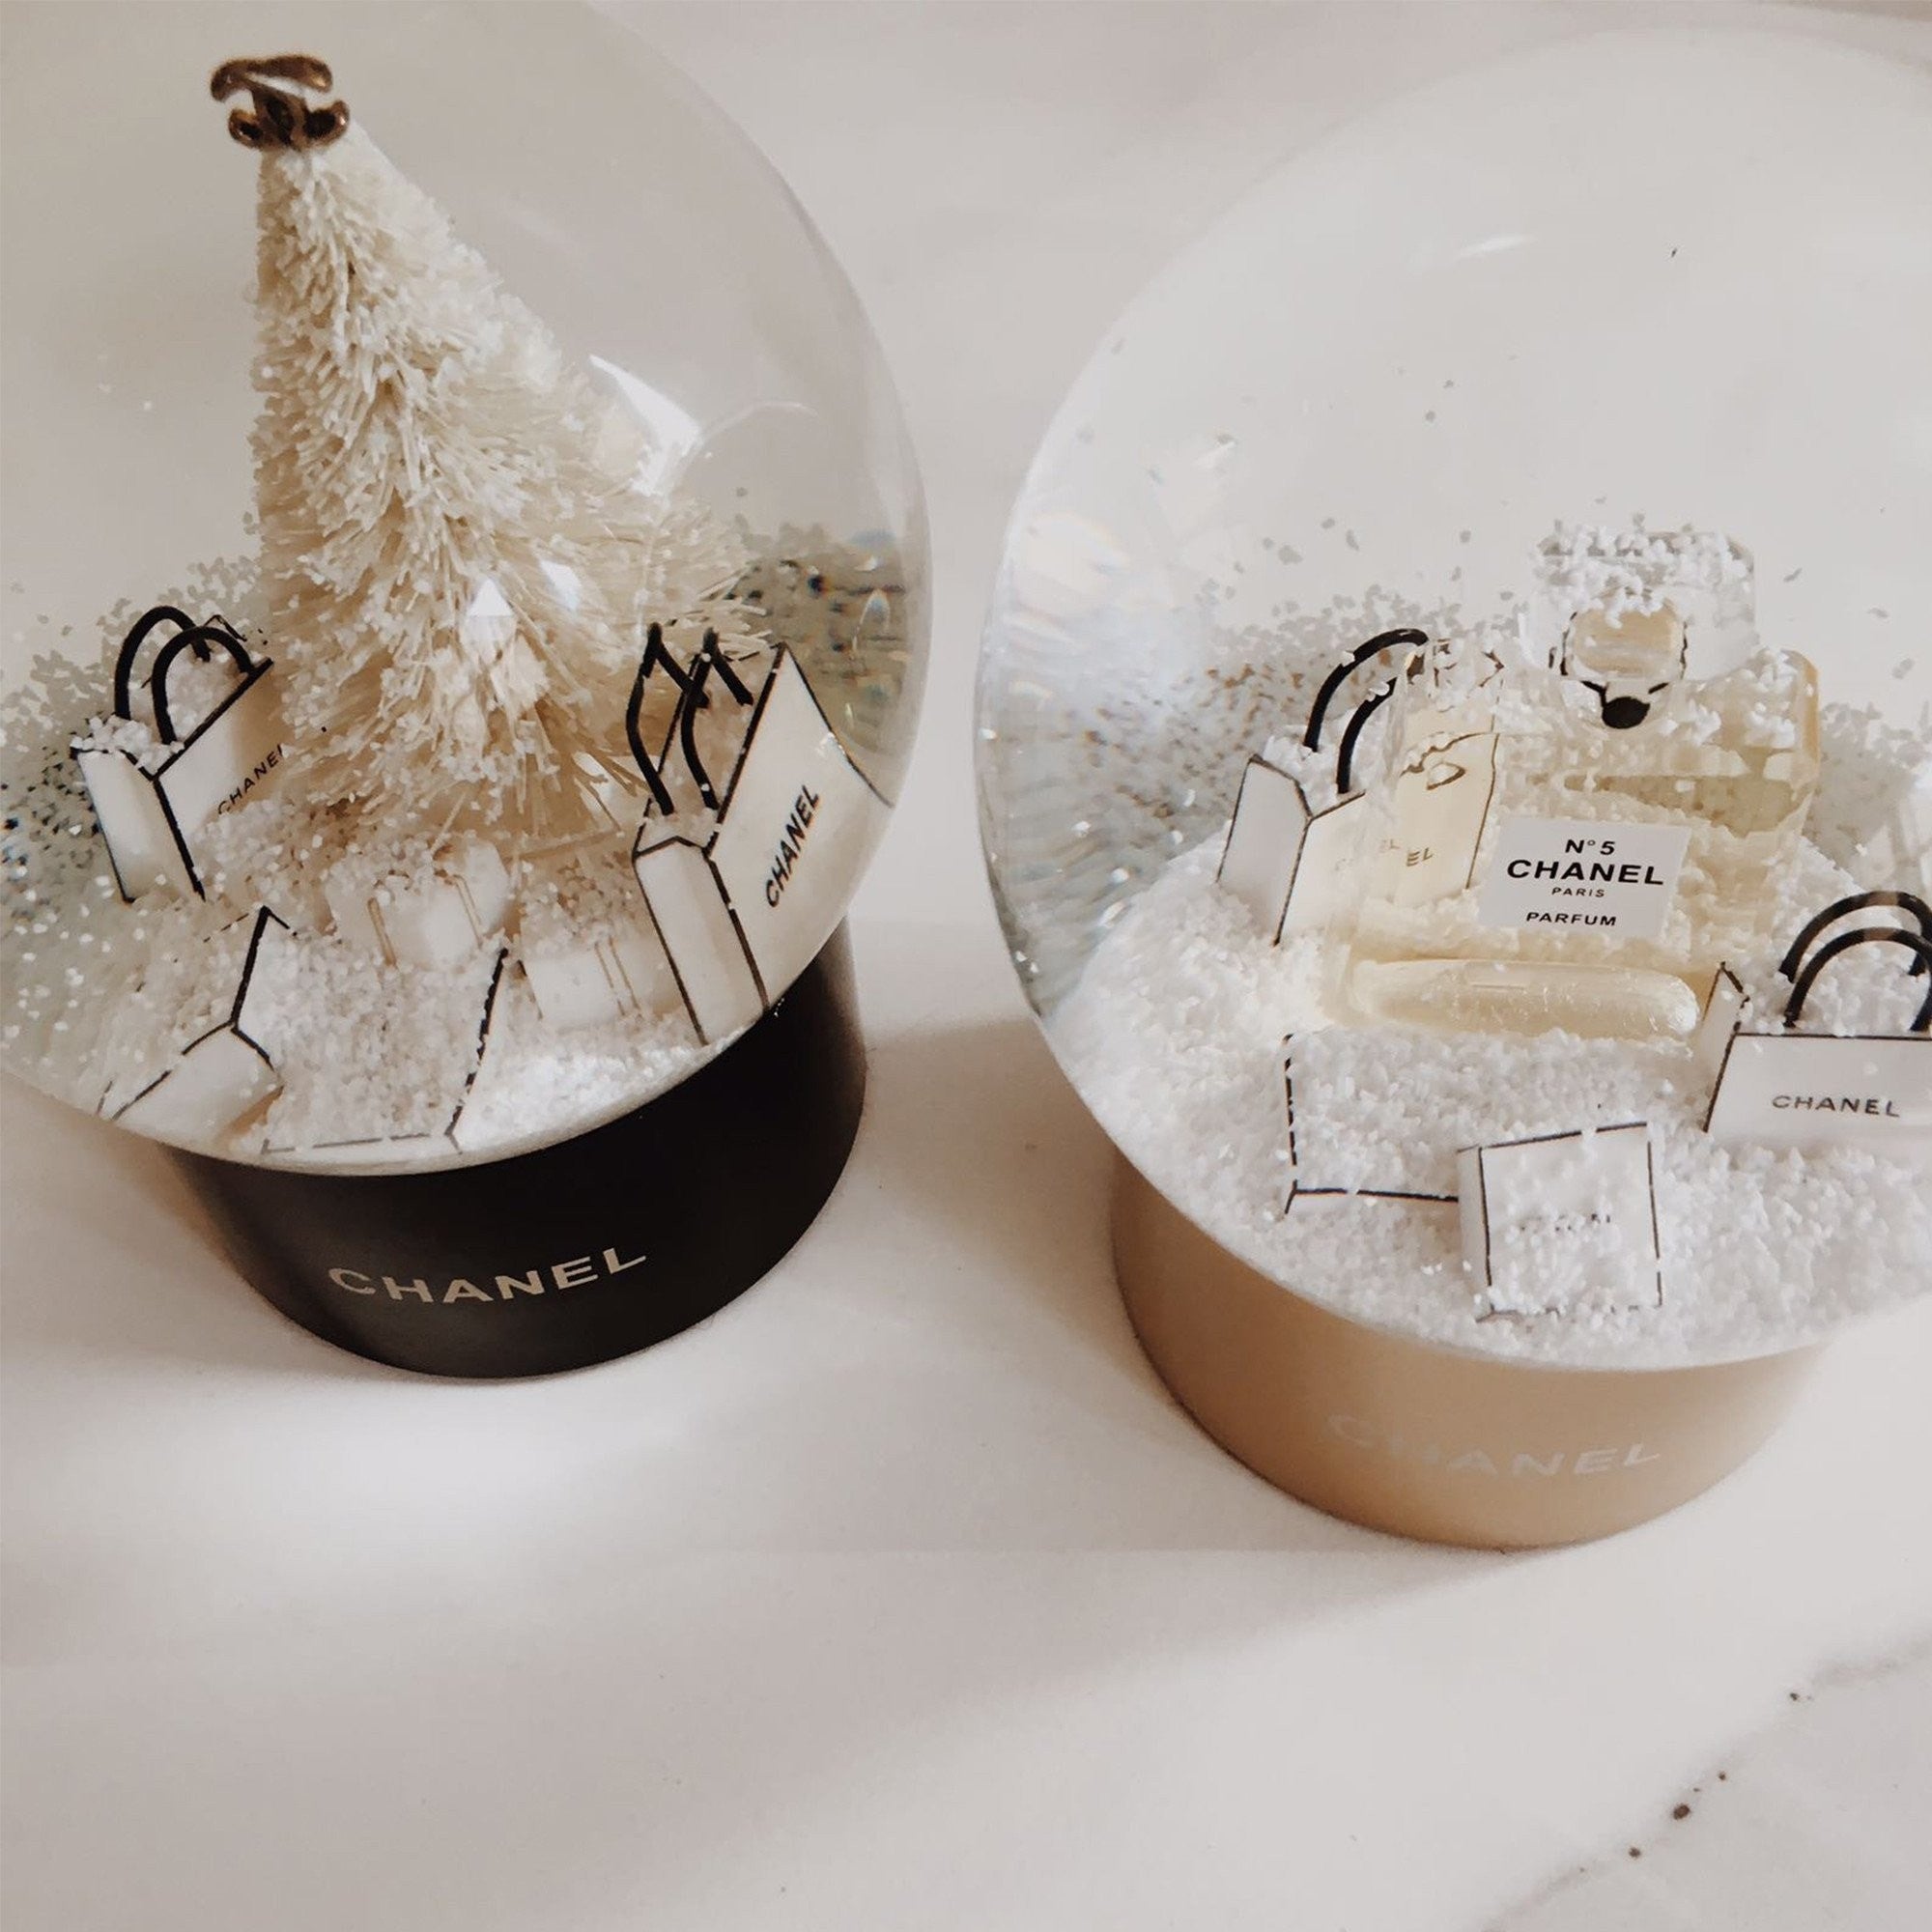 Replying to @l_o_r_i_m_a_r_i_e Chanel snowglobes explained #Chanel #ch, Chanel